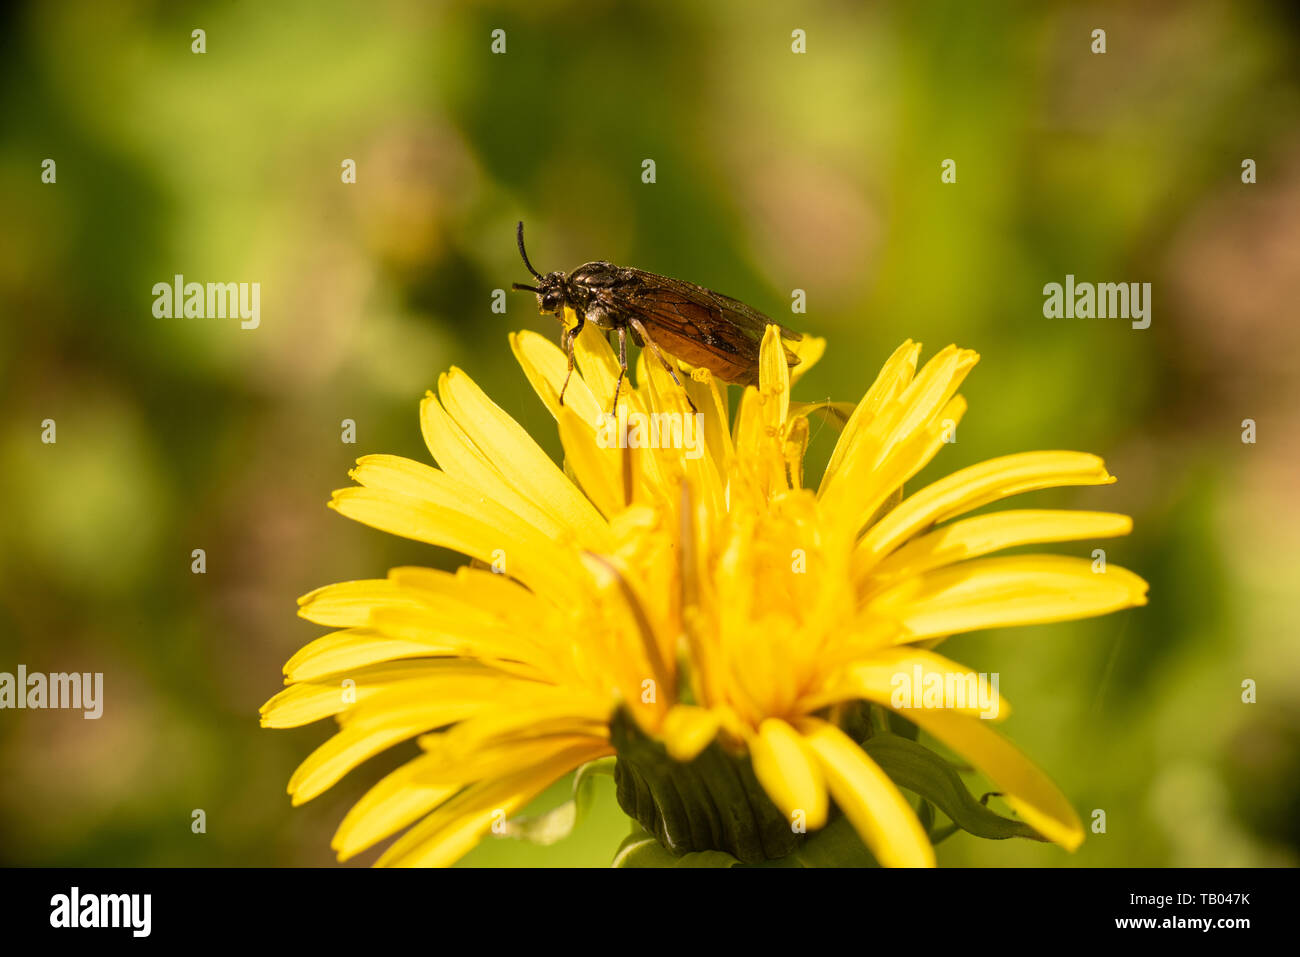 A sawfly on the petals of a dandelion. Stock Photo